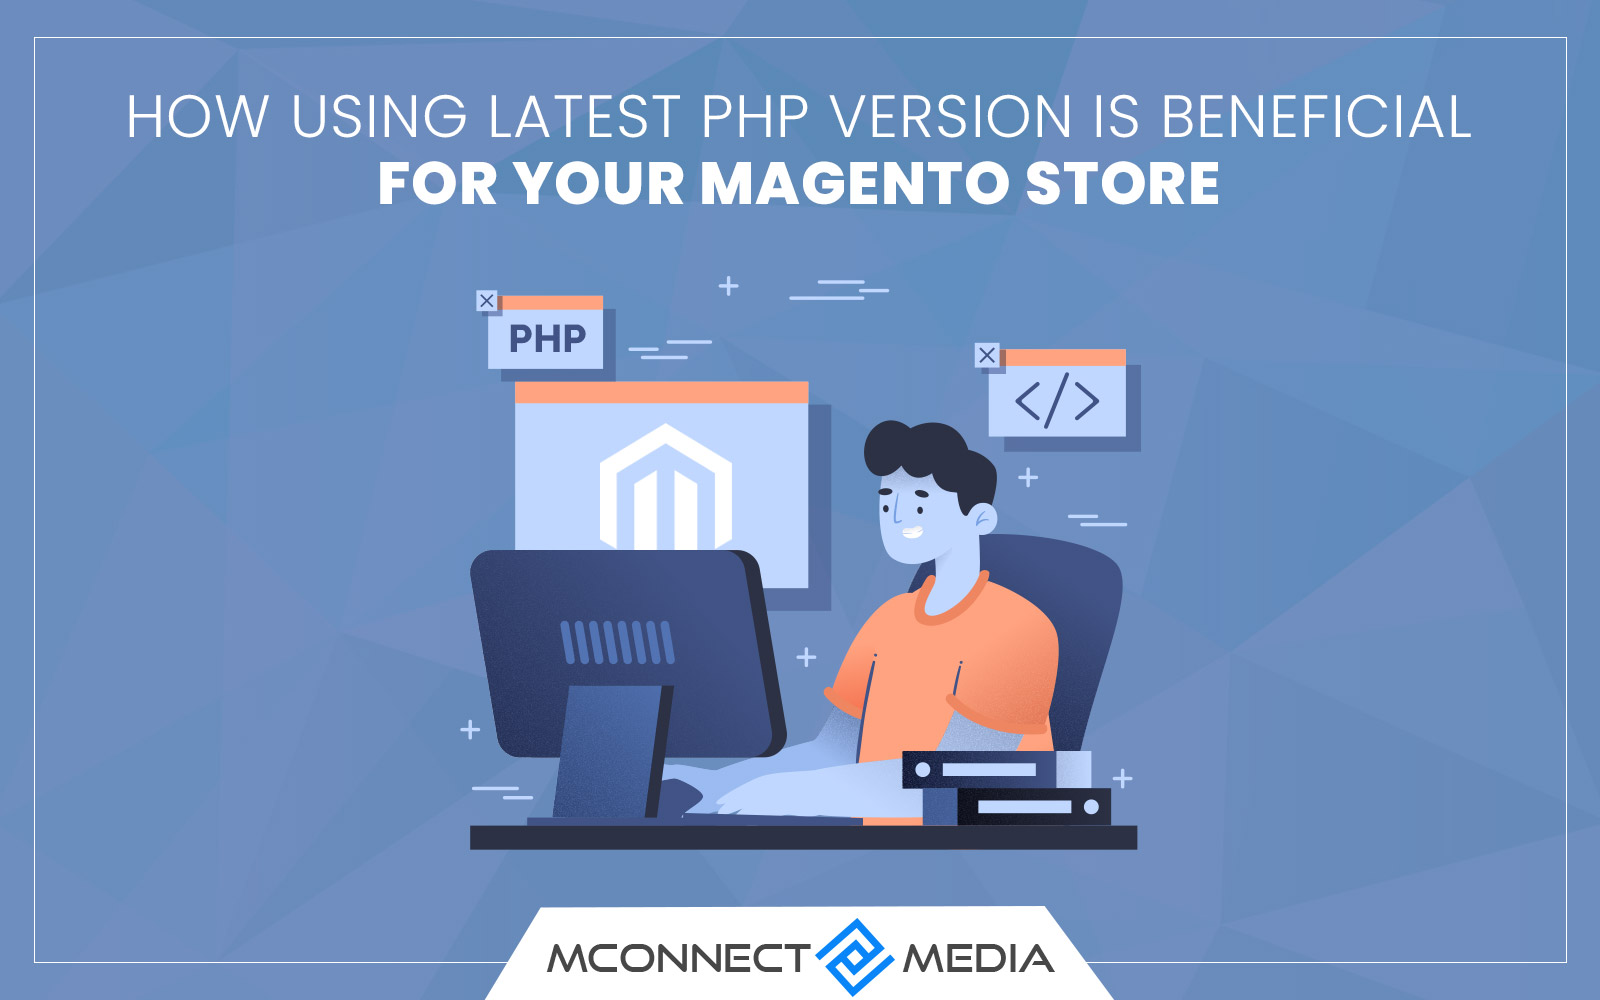 How Using Latest PHP Version is Beneficial for Magento Store?